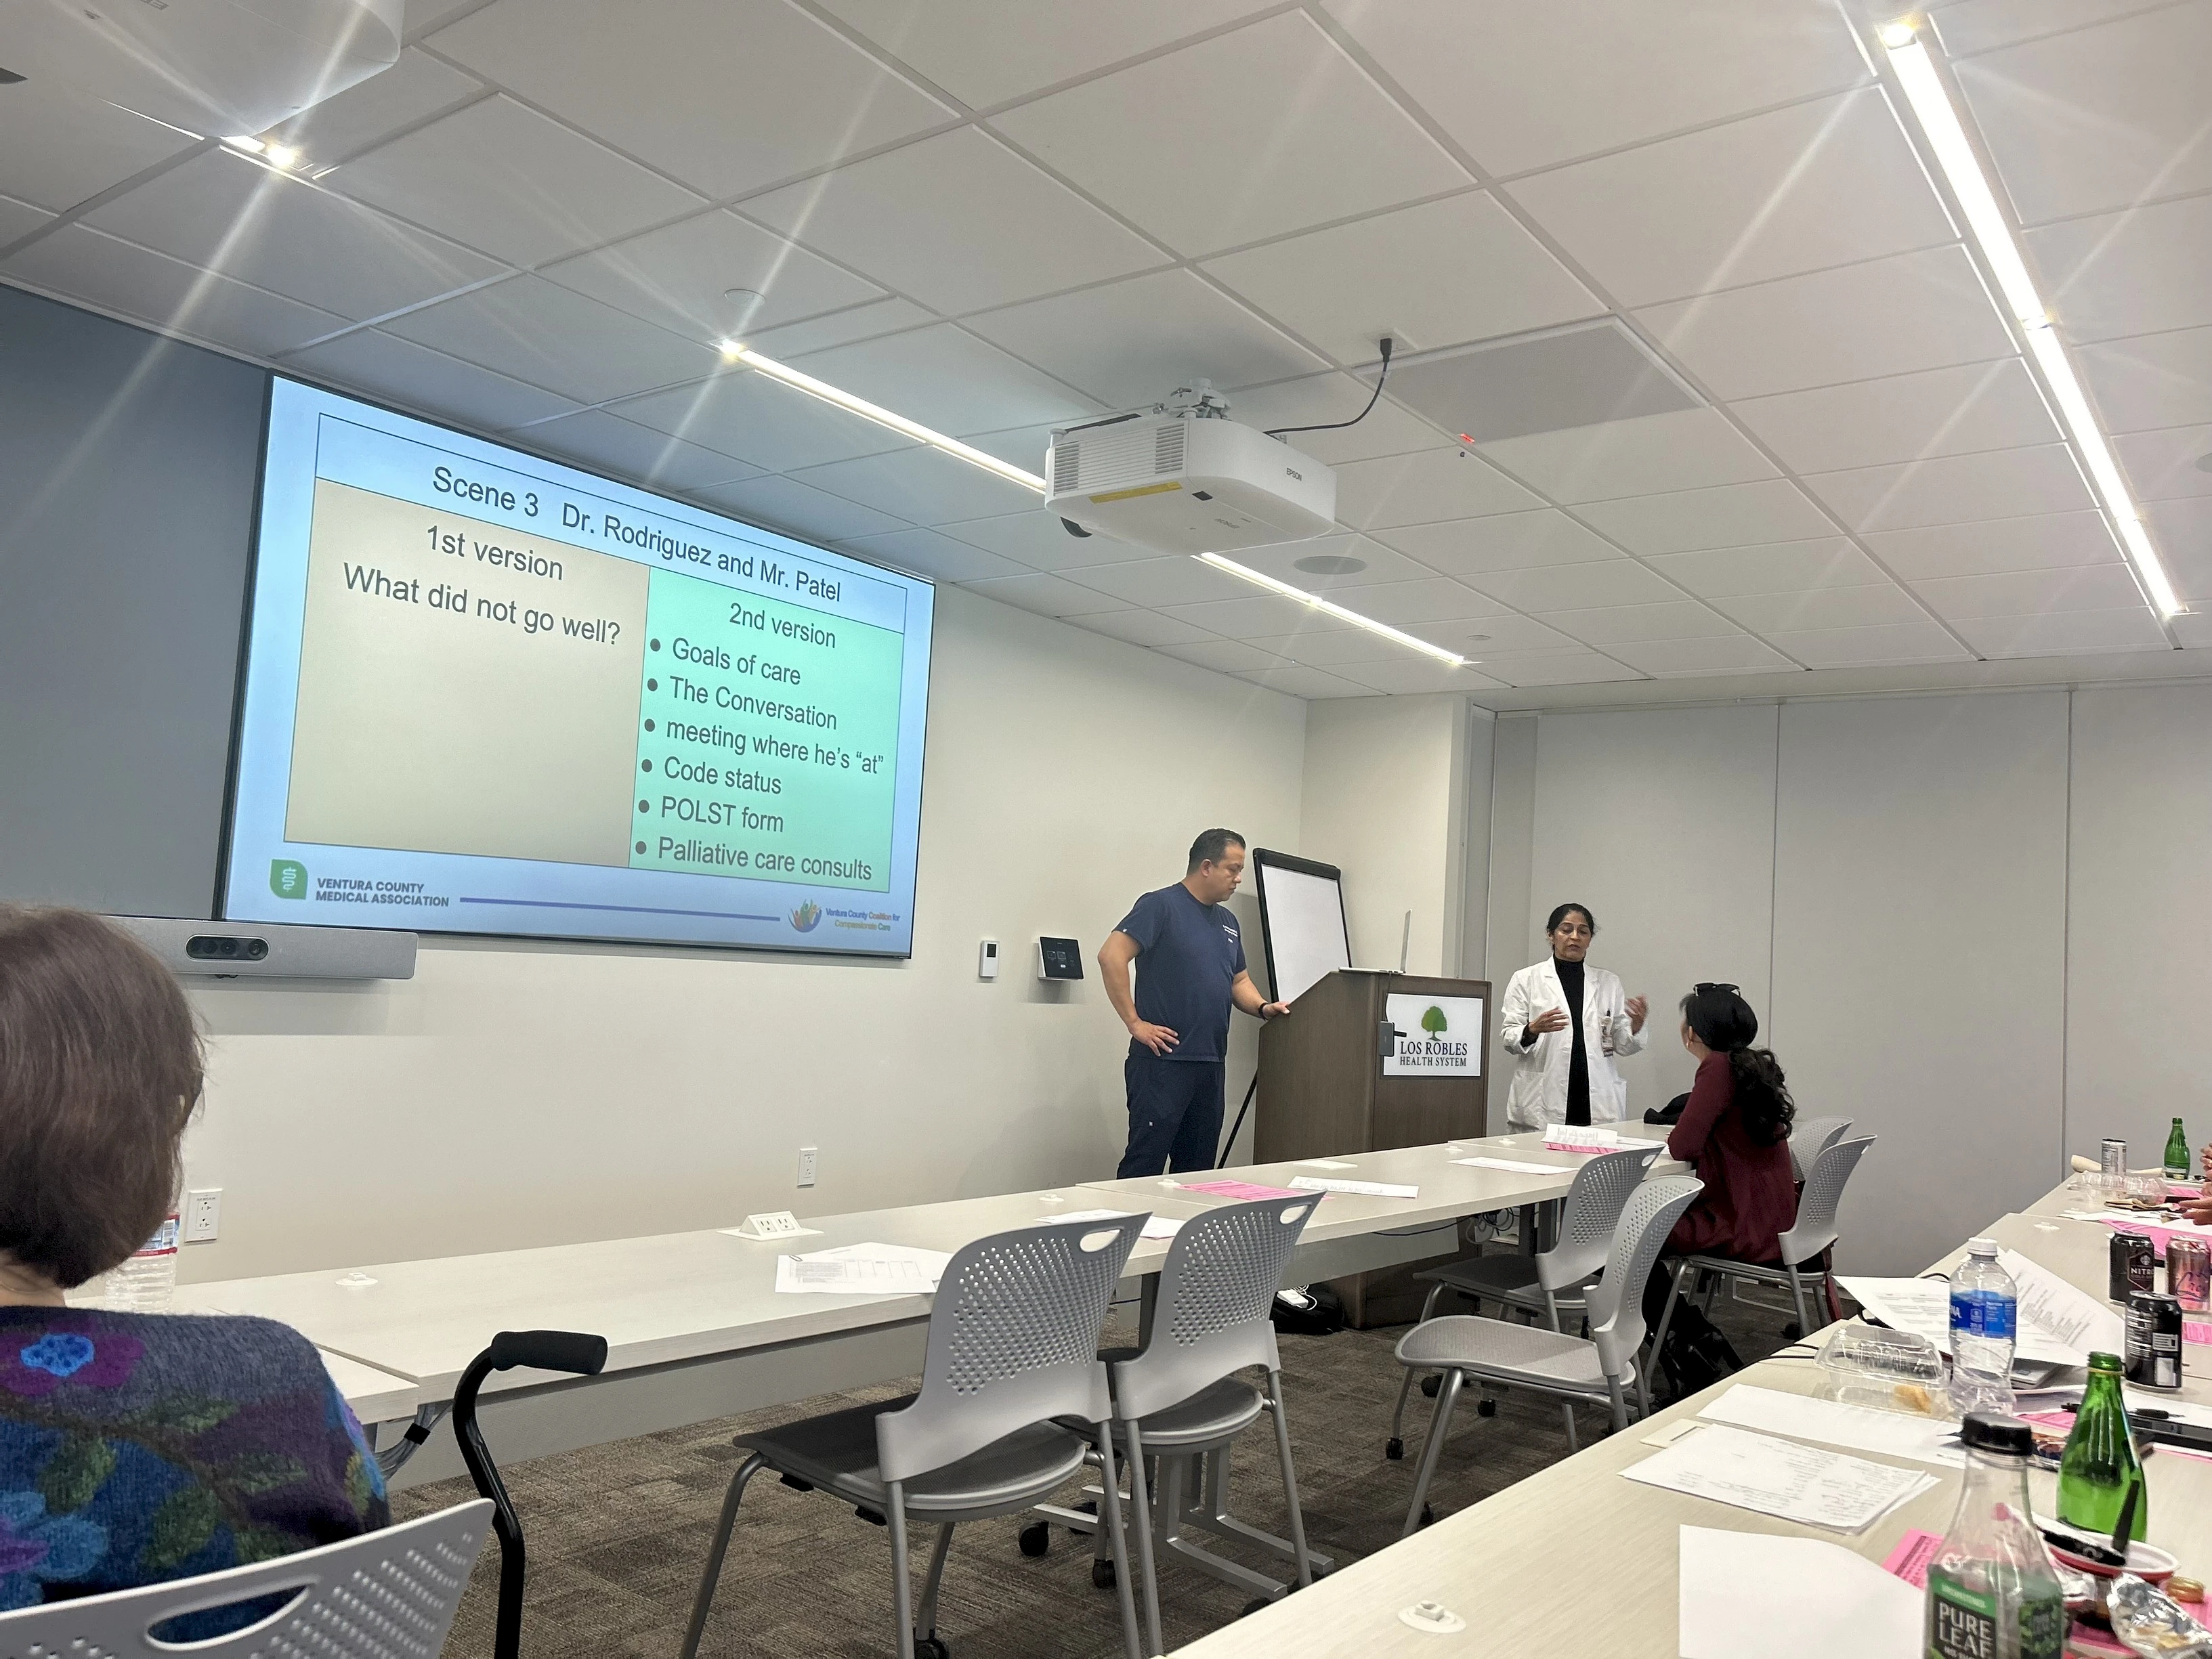 We attended a ‘Train the Professionals’ workshop from the Ventura County Medical Association.